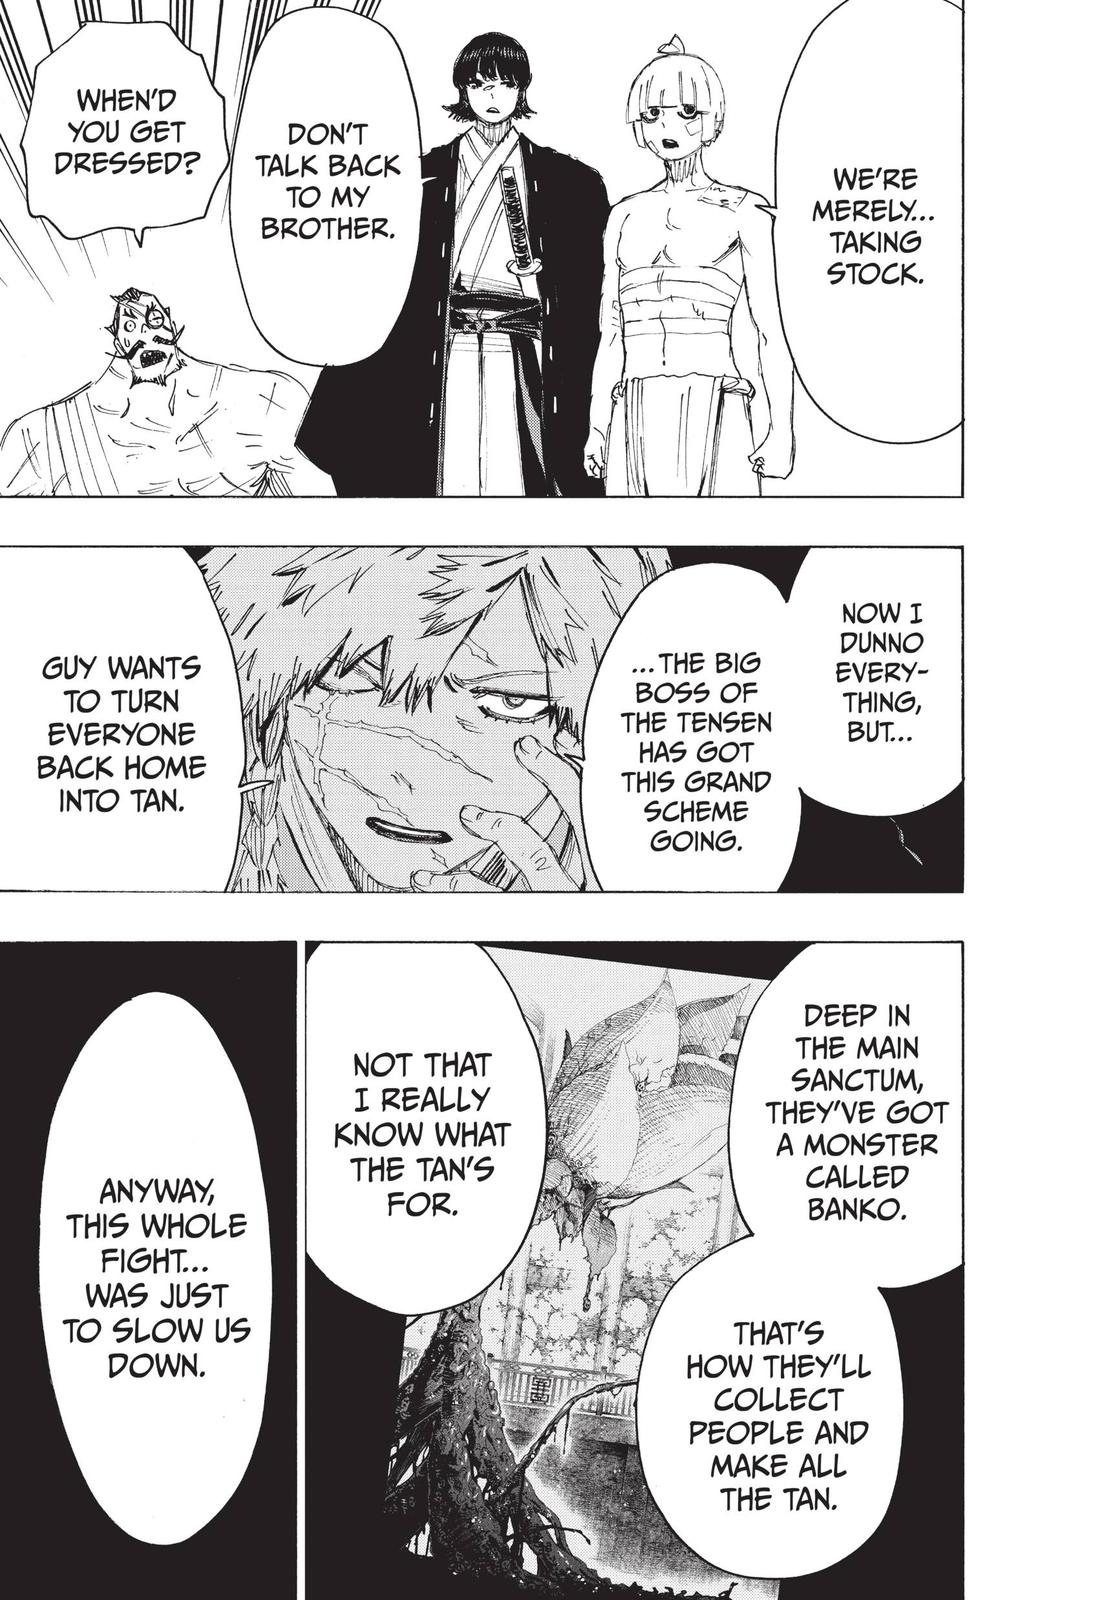 how come many of the sources i use to read, chapter 86 just loops back to  the first chapter. anyone else have this issue? : r/jigokuraku